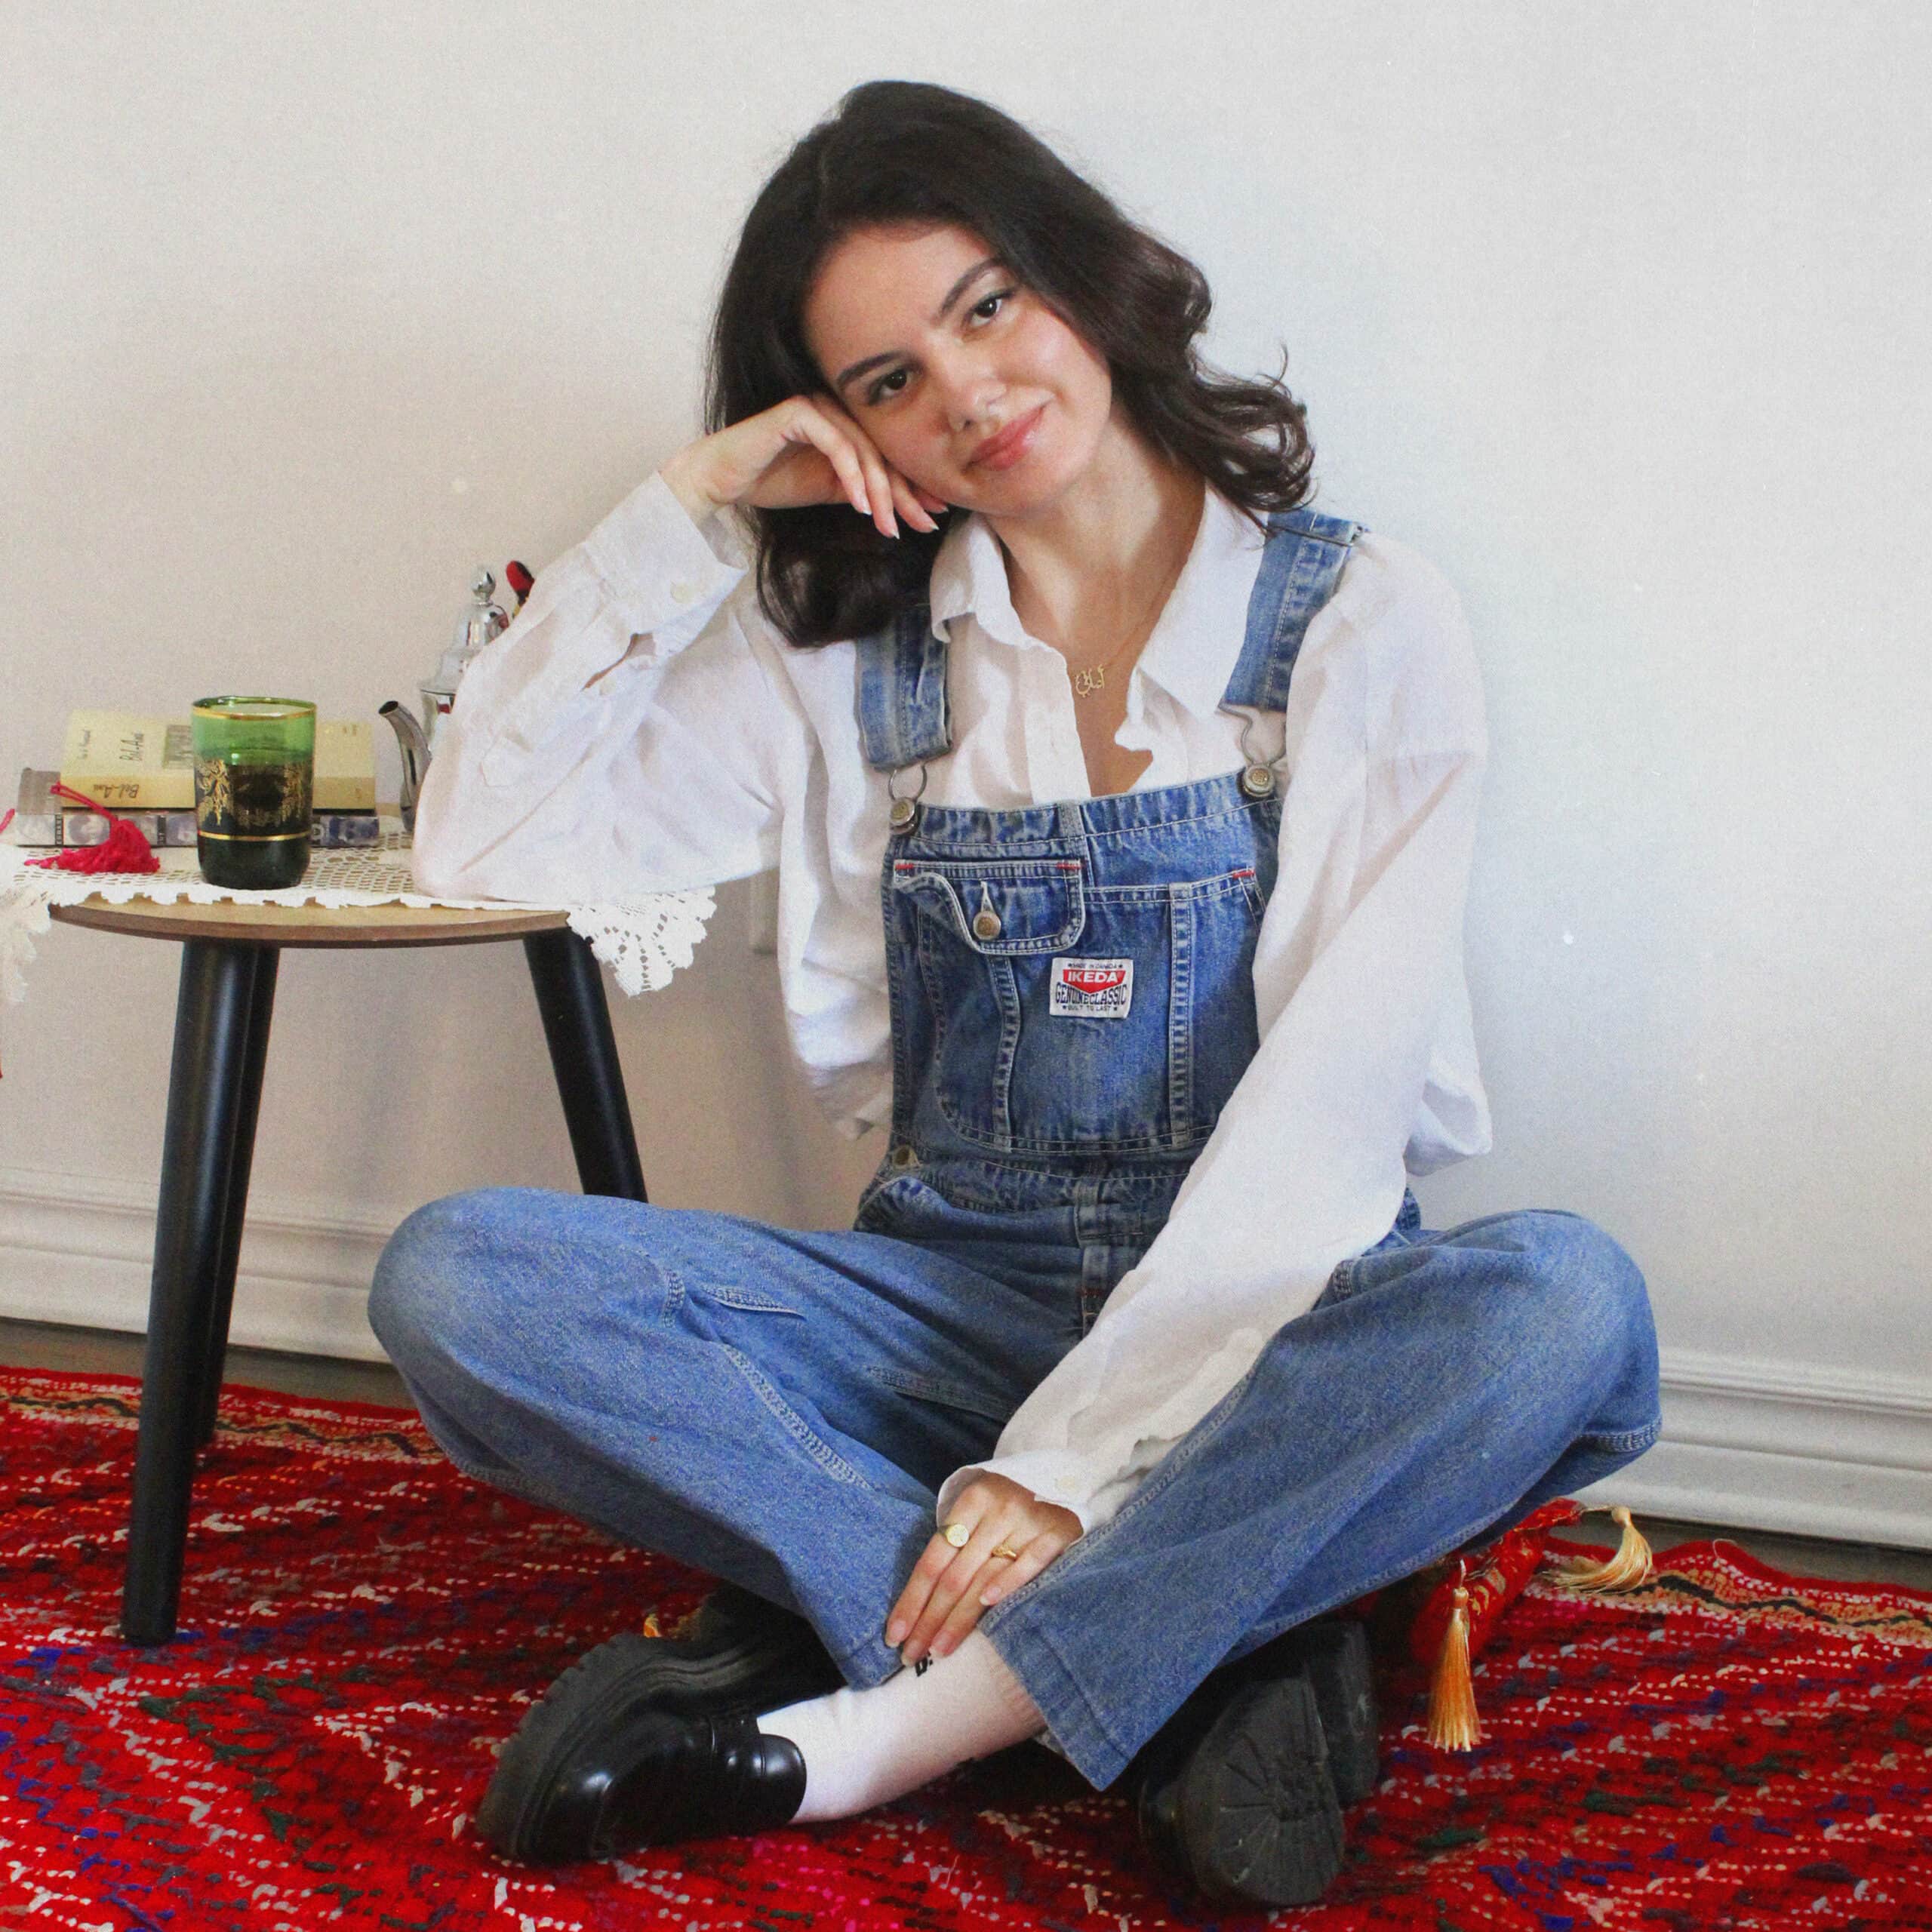 Amani smiles is sitting cross legged on a red rug smiling at the camera. She is wearing a white dress shirt with blue overalls.